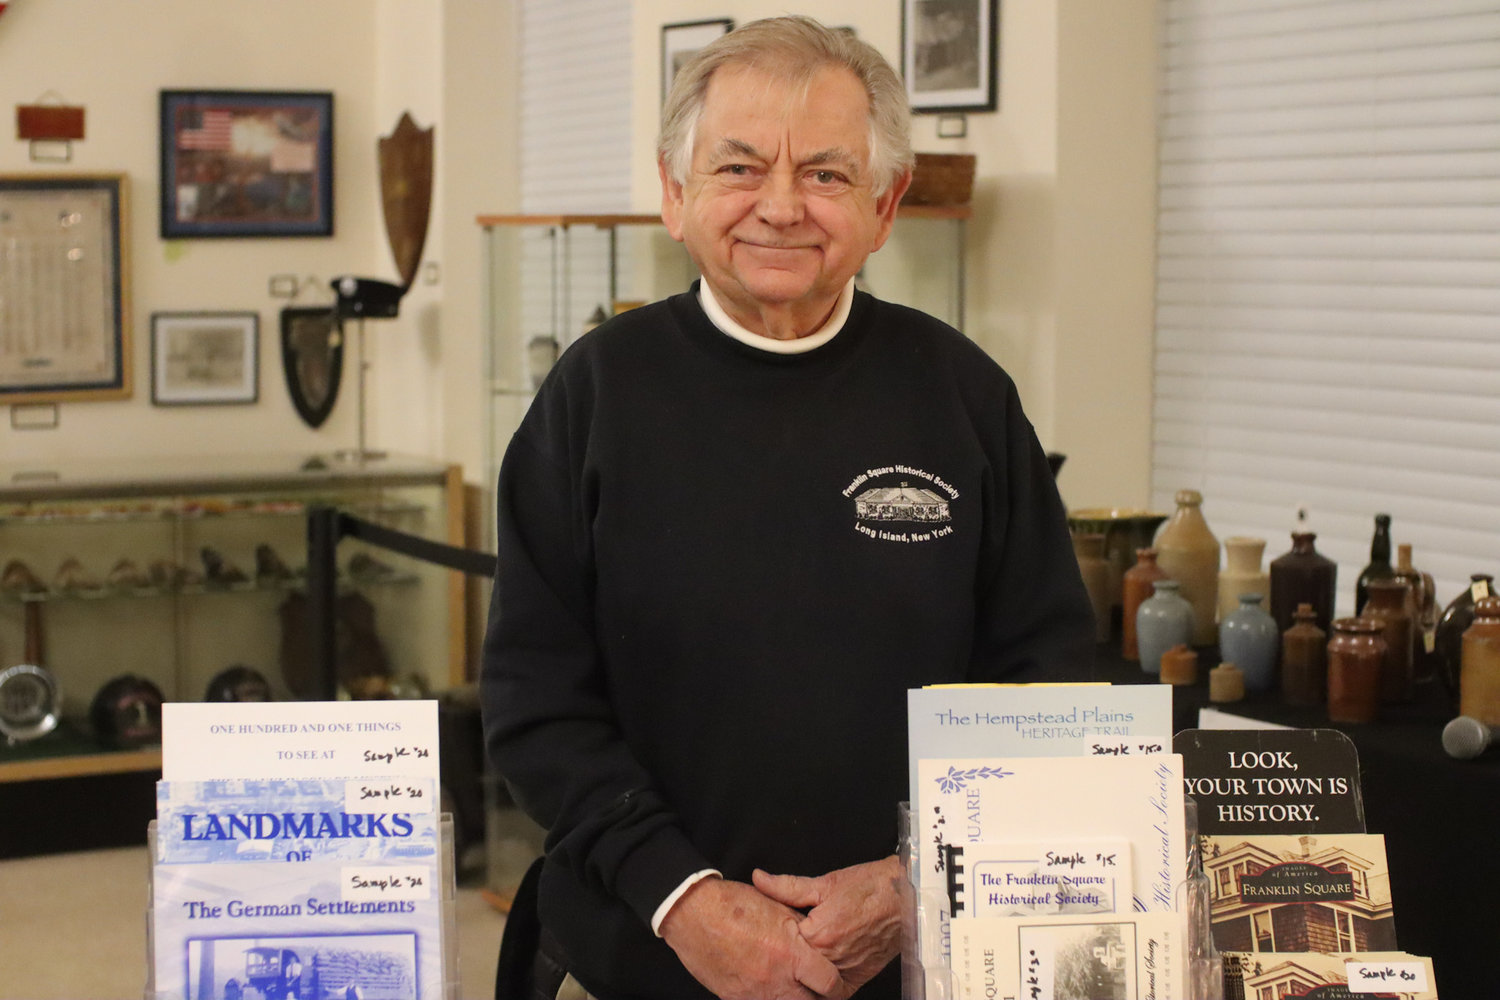 Bill Youngfert, secretary of the Franklin Square Historical Society, welcomes the public to the Franklin Square Museum’s holiday open house. He offered brochures detailing the community’s rich German history.